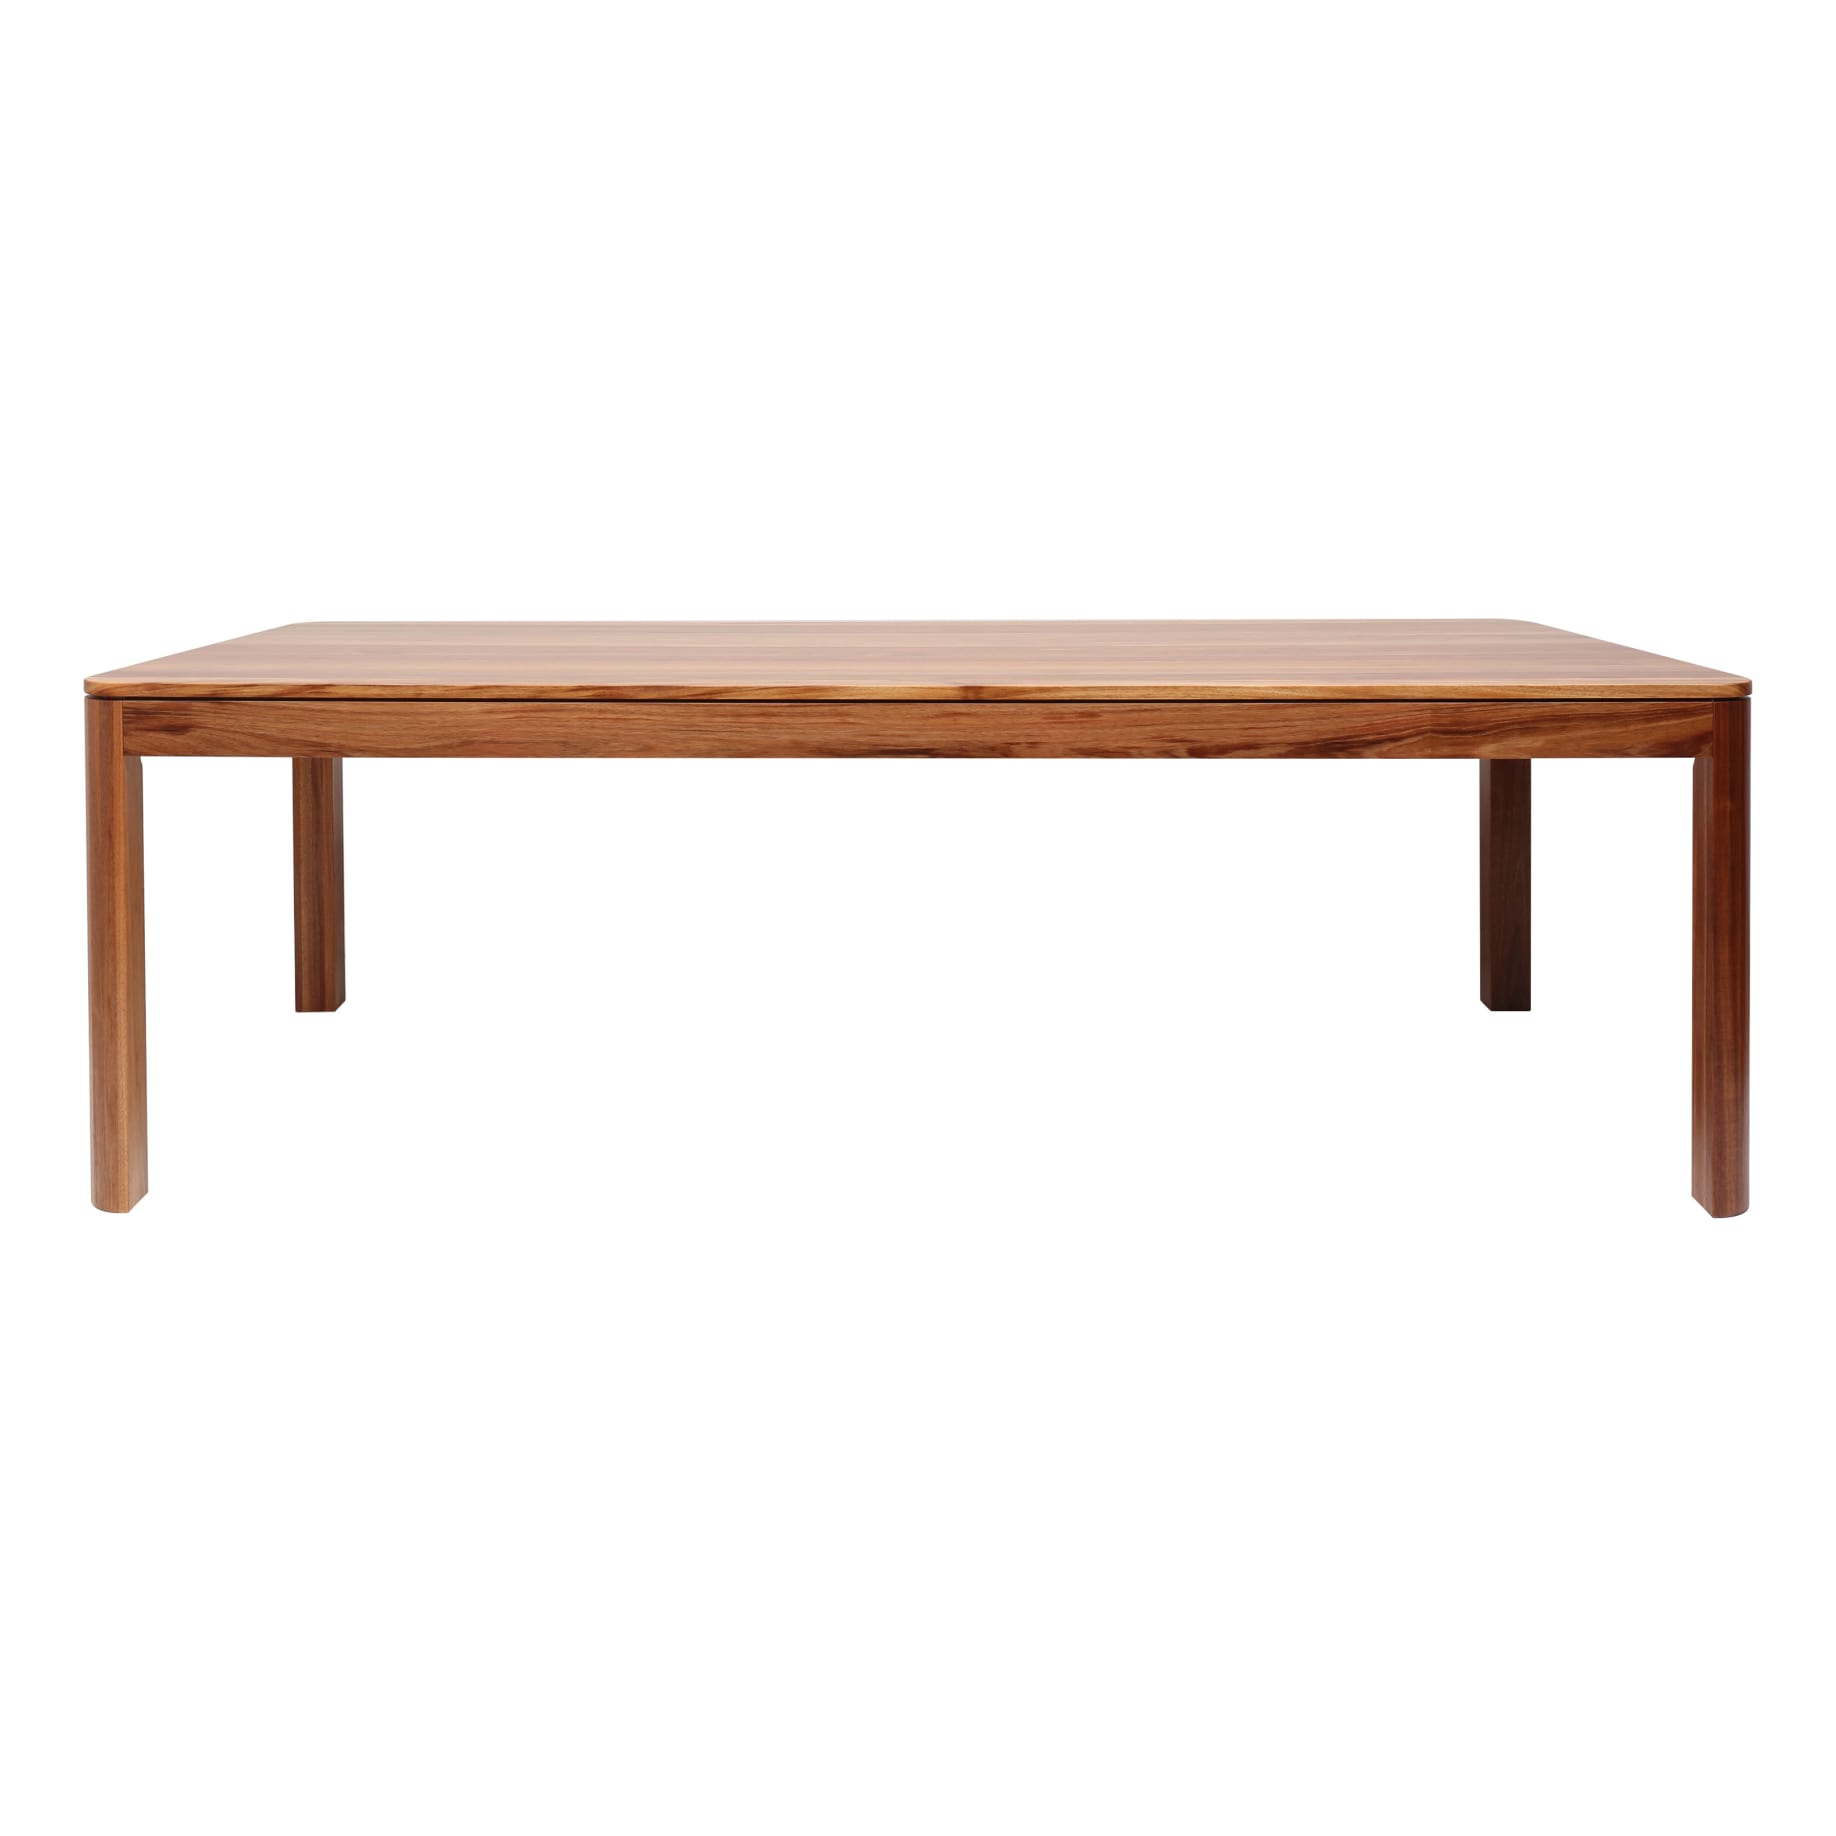 Bronte Dining Table 210cm